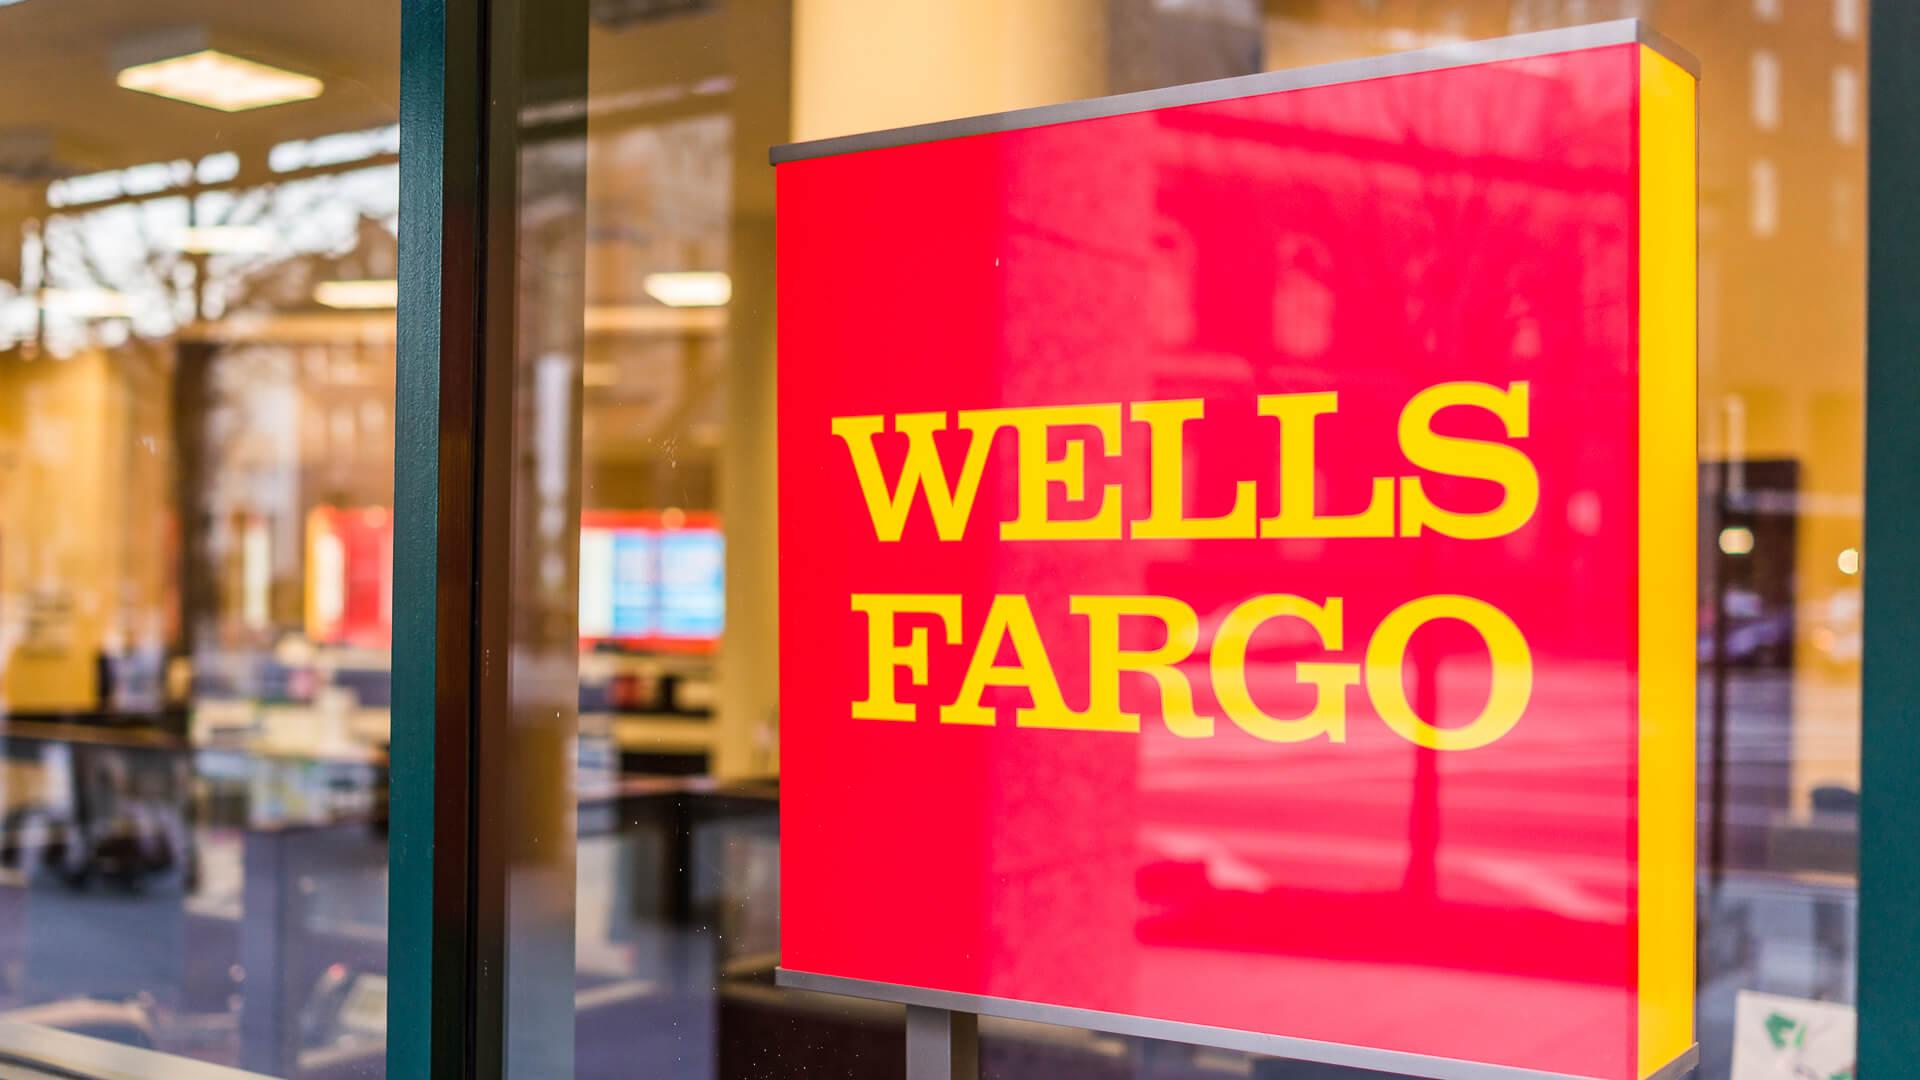 Wells Fargo Near Me: Find Branch Locations and ATMs Nearby